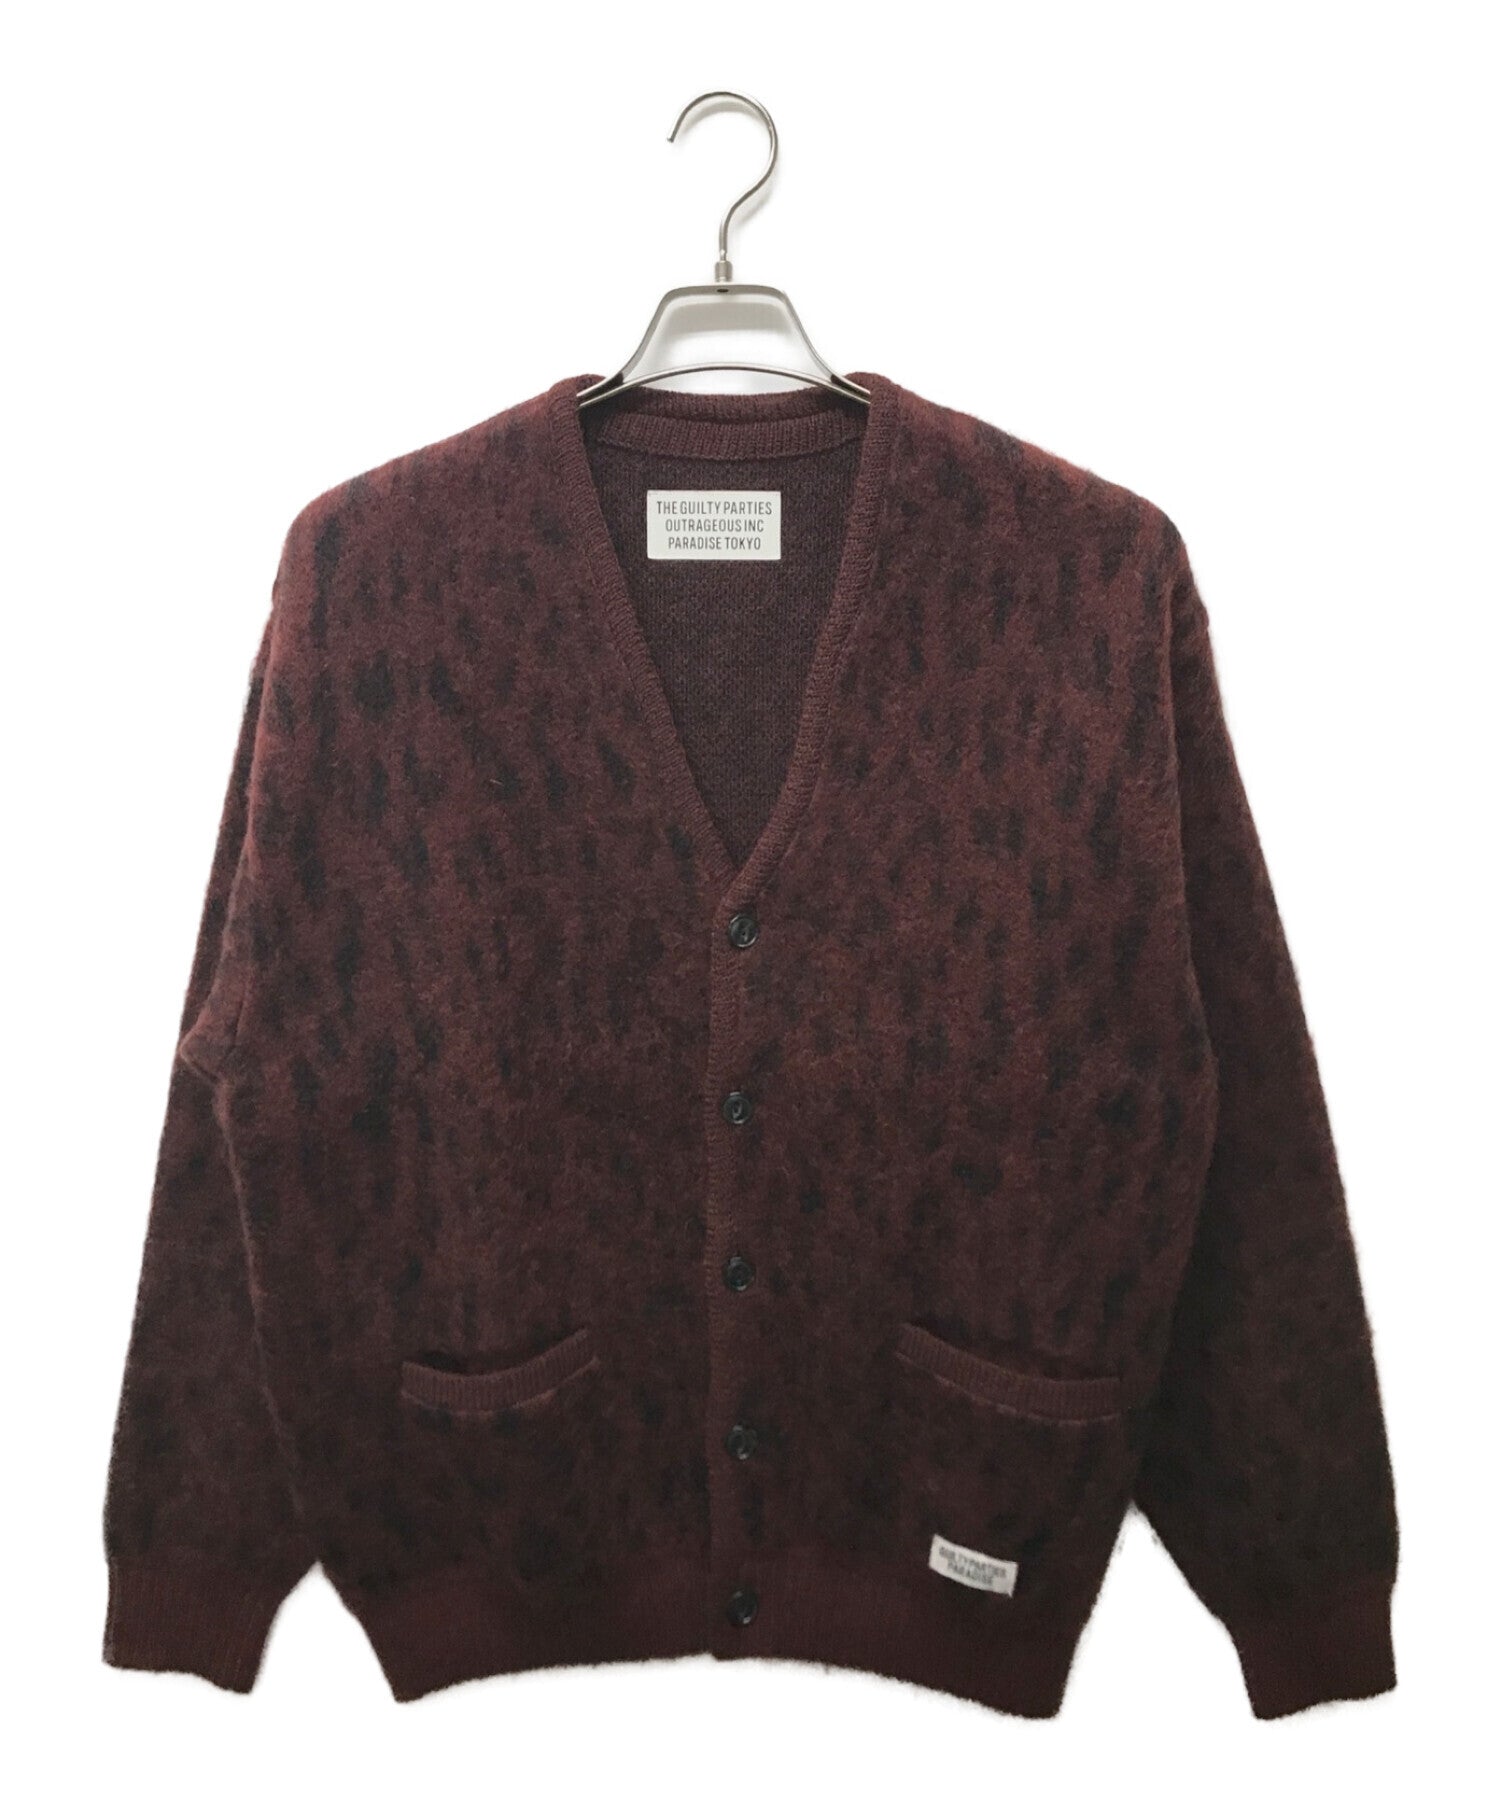 WACKO MARIA Leopard-Jacquard Knitted Sweater for Men